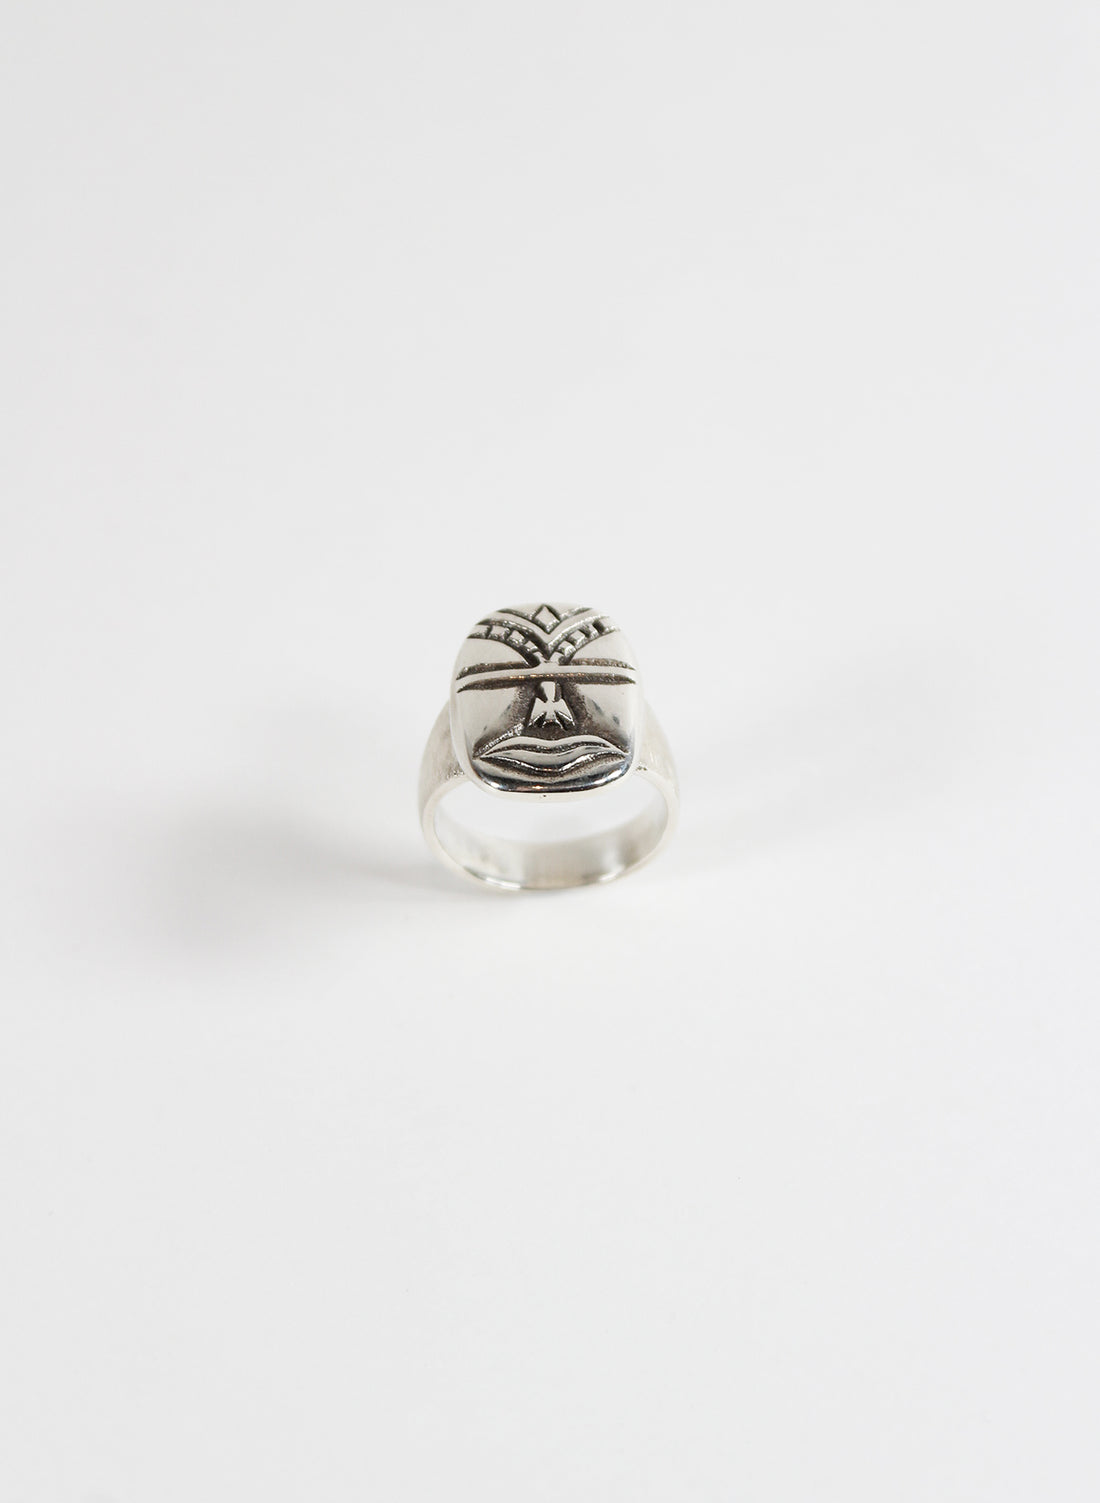 Mana Wāhine - Sterling Silver Ring